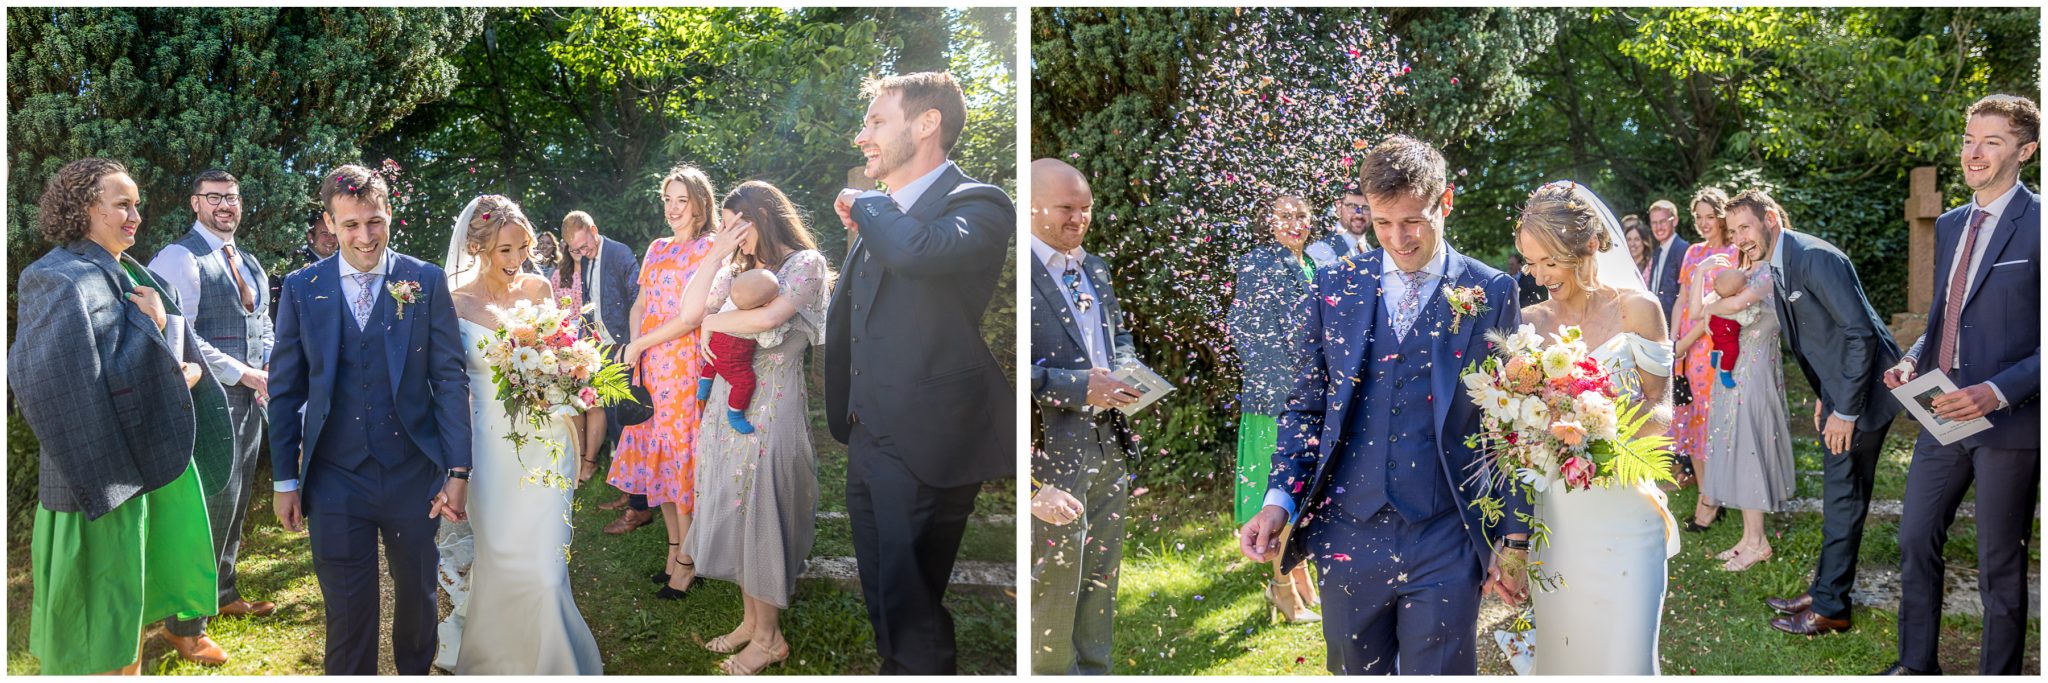 Confetti for the newly married couple